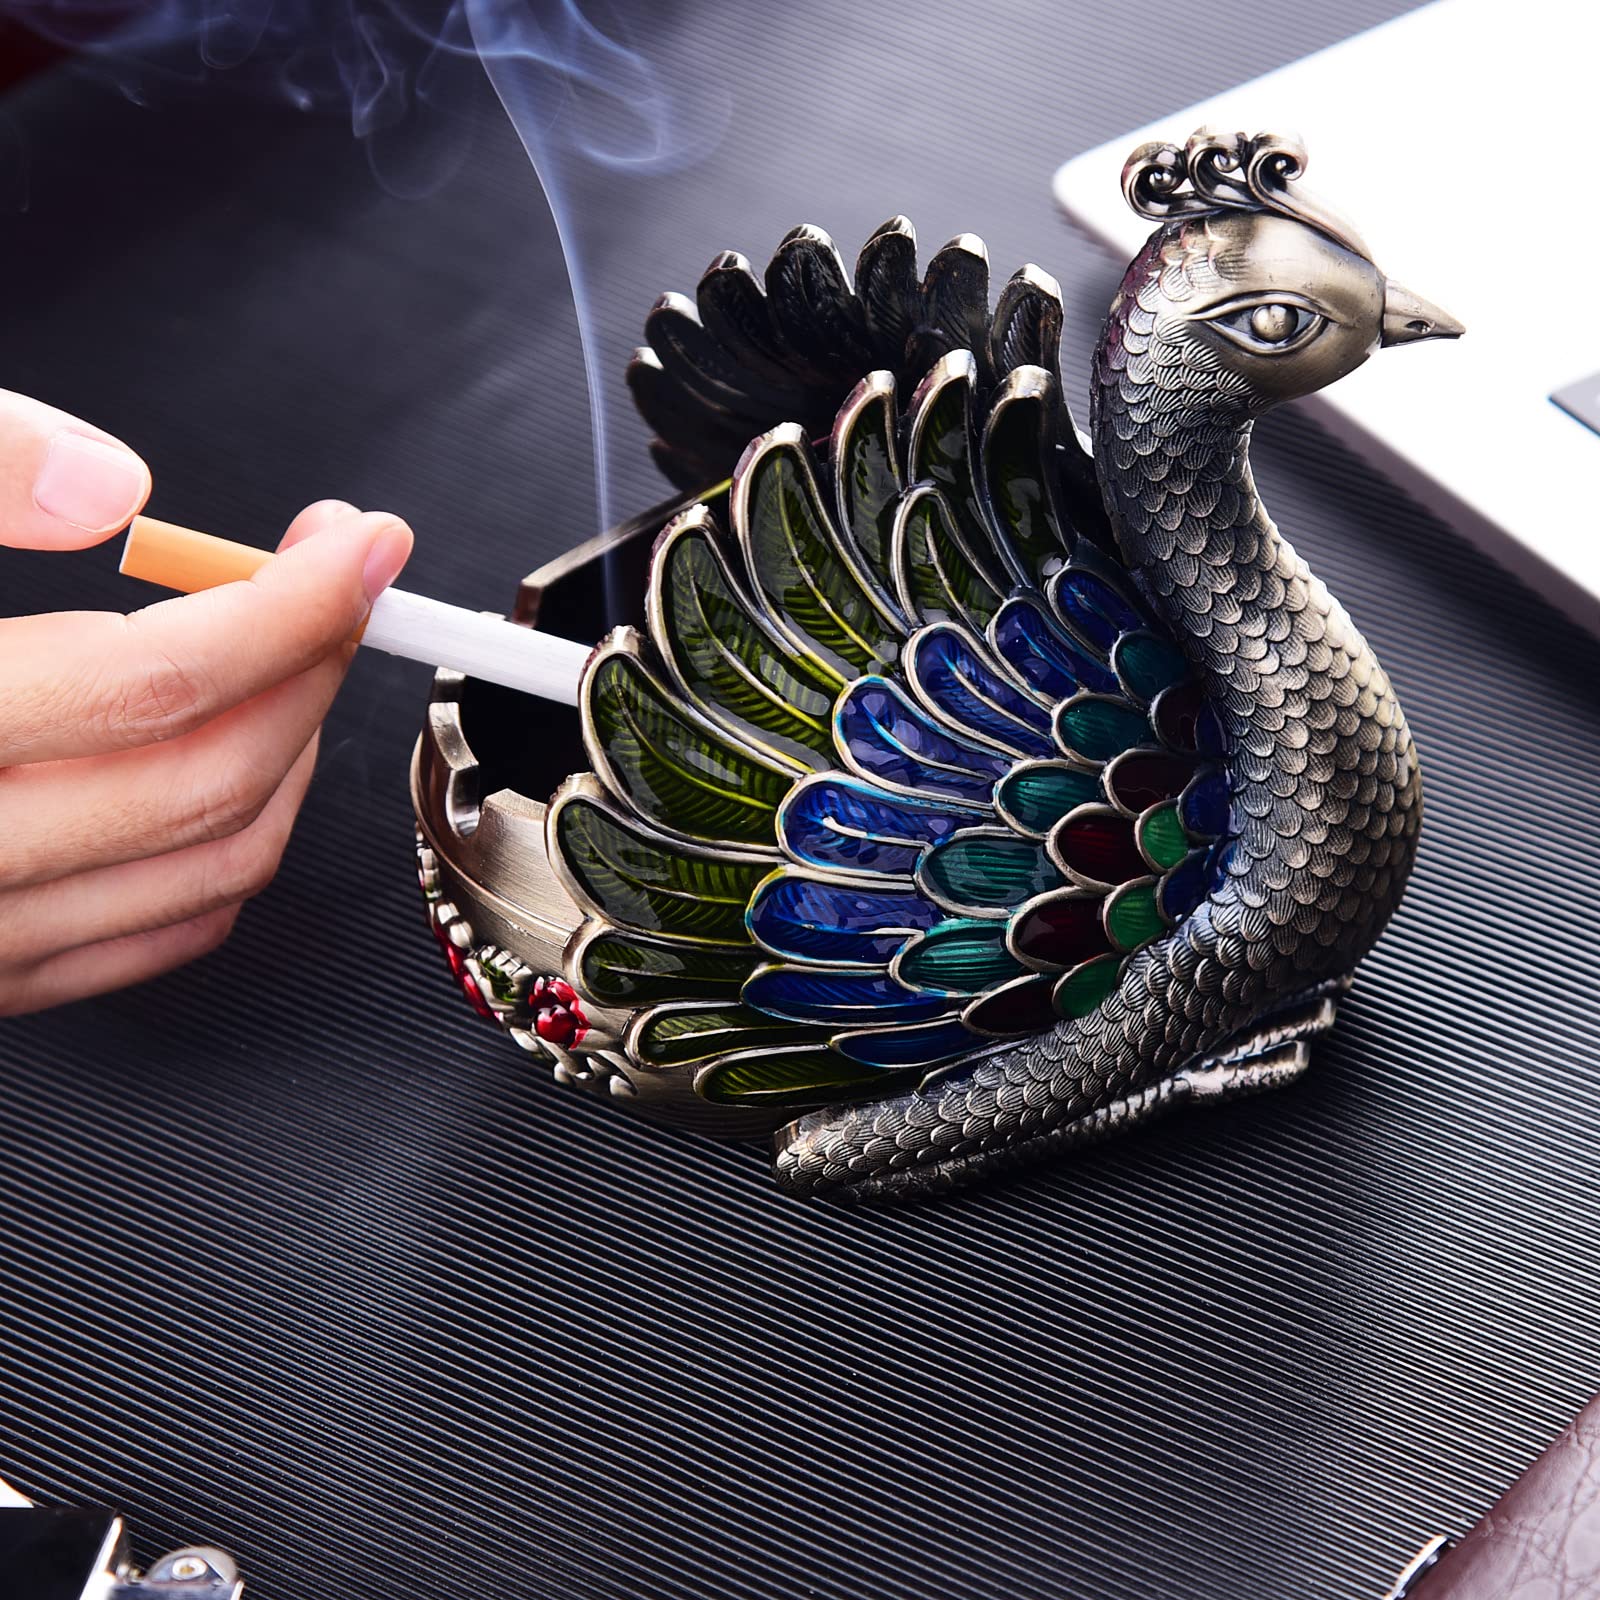 K COOL Peacock Metal Ashtray with Lid, Windproof Portable Cigarette Ashtray for Indoor or Outdoor Use, Ash Holder for Smokers, Desktop Smoking Ash Tray for Patio Porch Reception Decoration (Bronze)